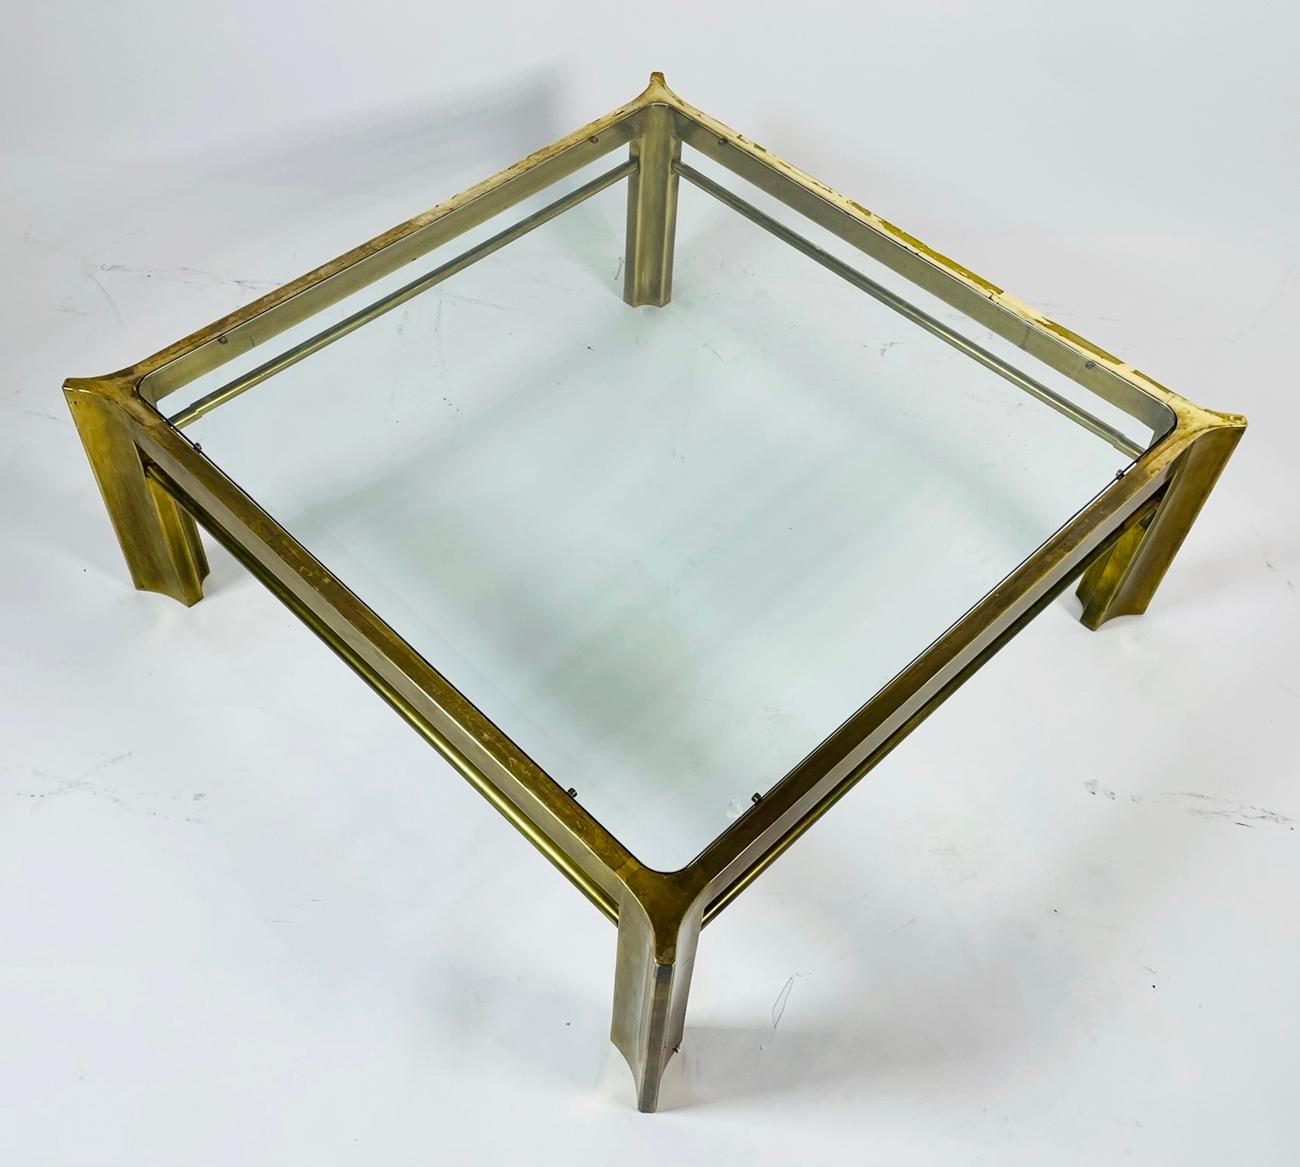 Rare coffee table by Mastercraft with glass bevel edge top on brass frame. The four legs are based off their 